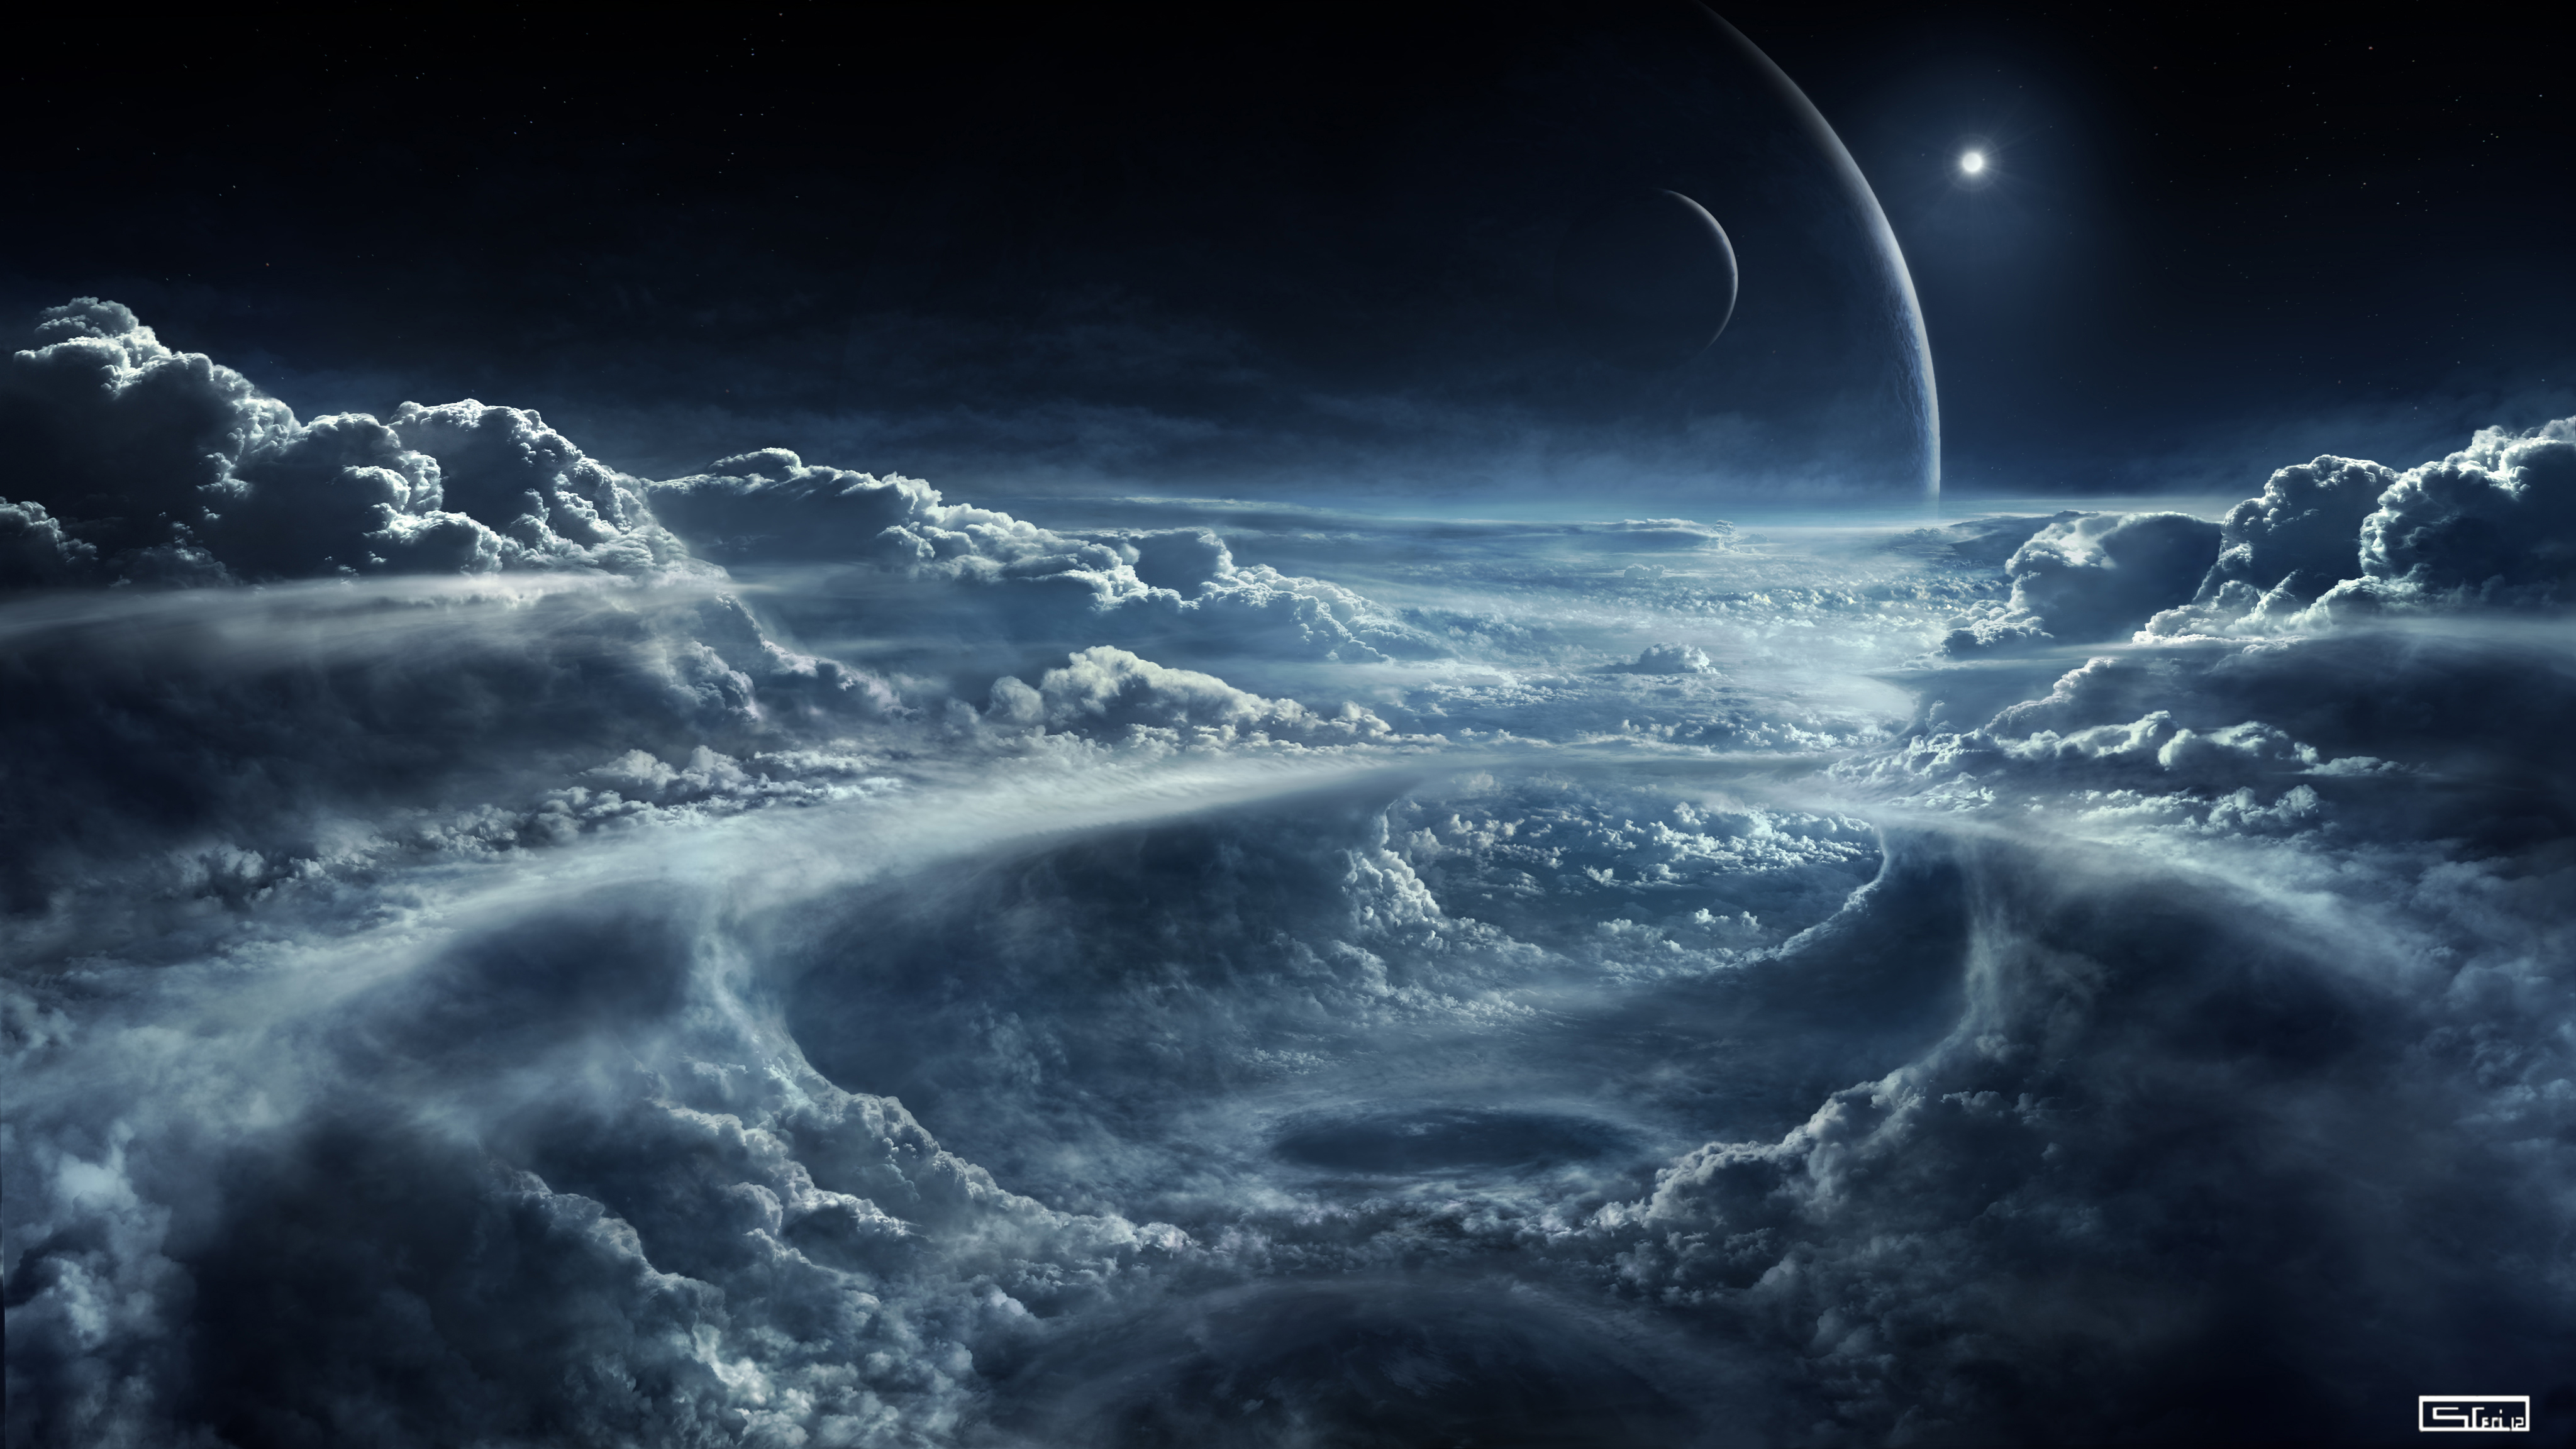 4K Space and Clouds Wallpaper 4K Wallpaper   Ultra HD 4K Wallpapers 4096x2304